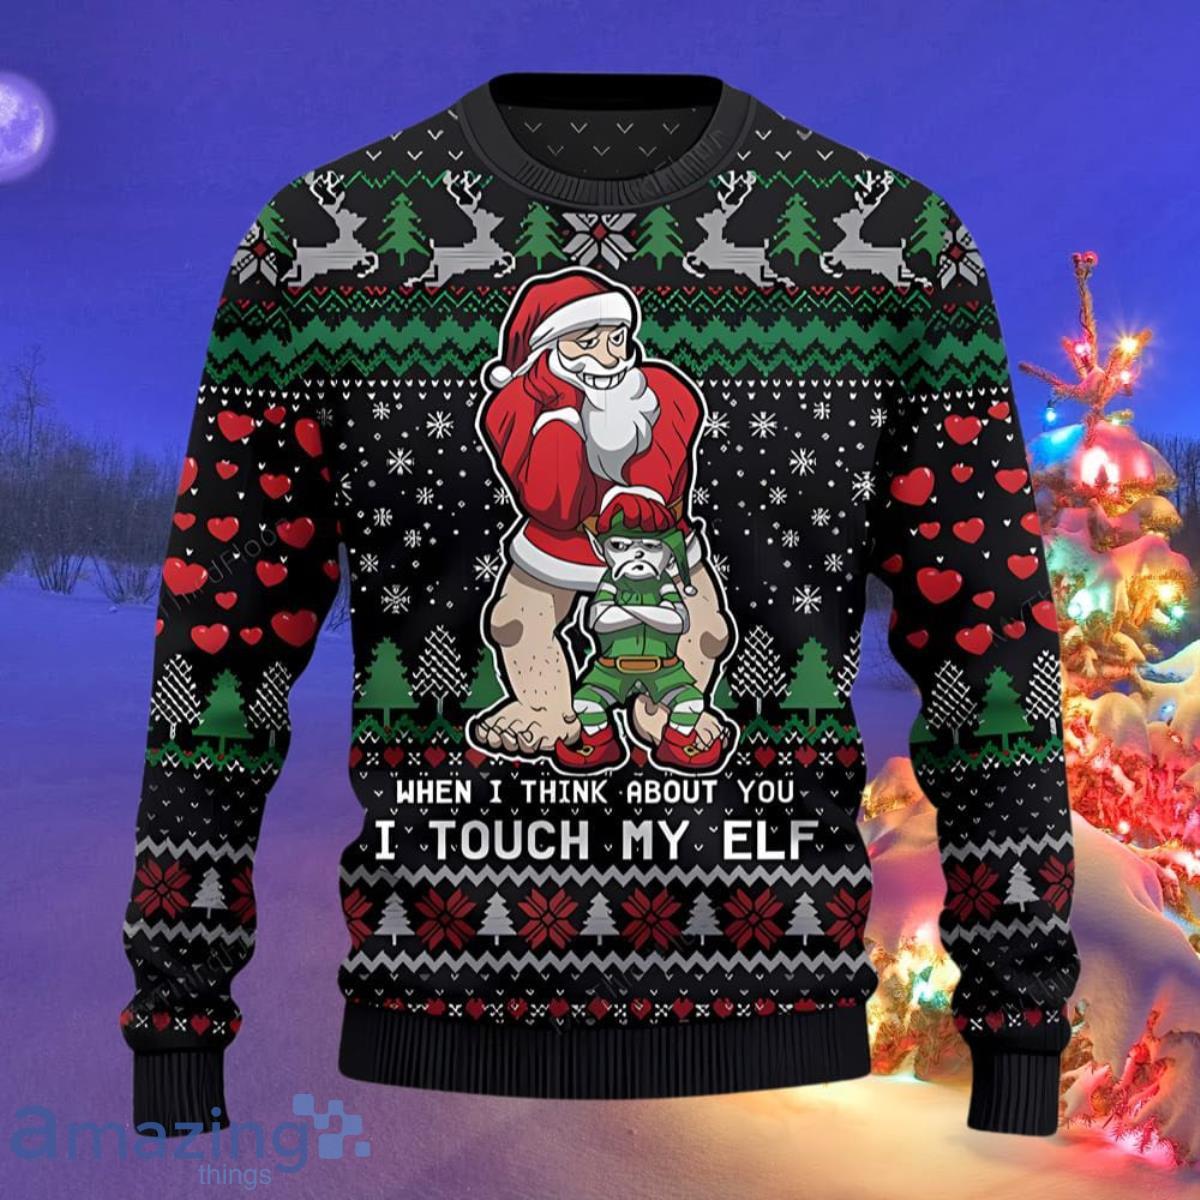 When I Think About You I Touch My Elf Ugly Christmas Sweater Impressive Gift For Loved Ones Product Photo 1